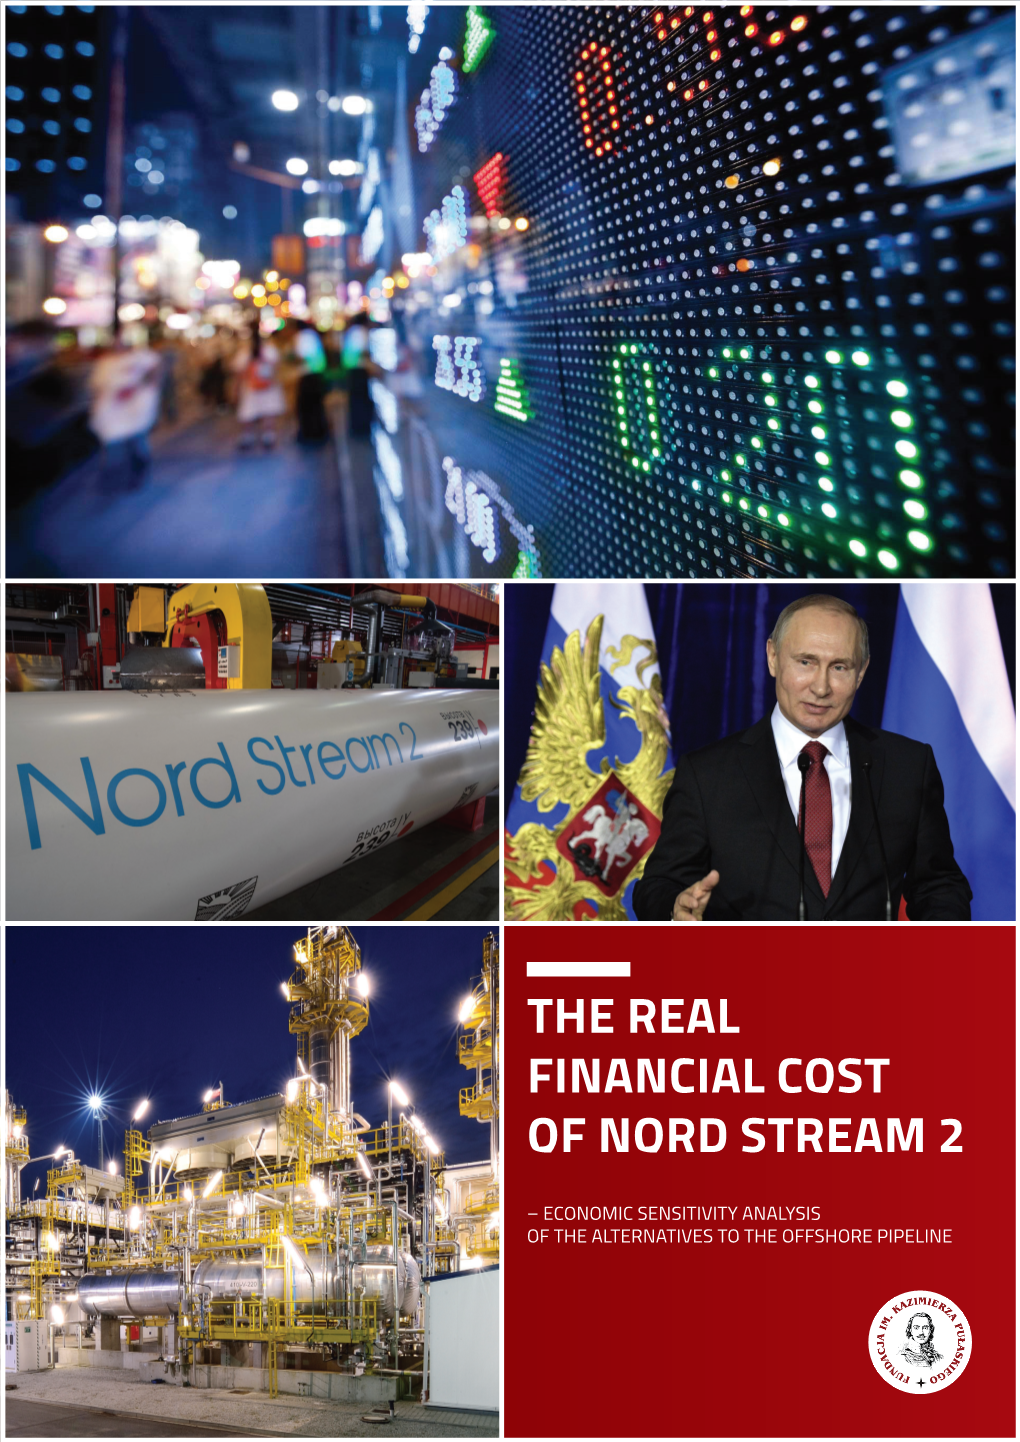 The Real Financial Cost of Nord Stream 2